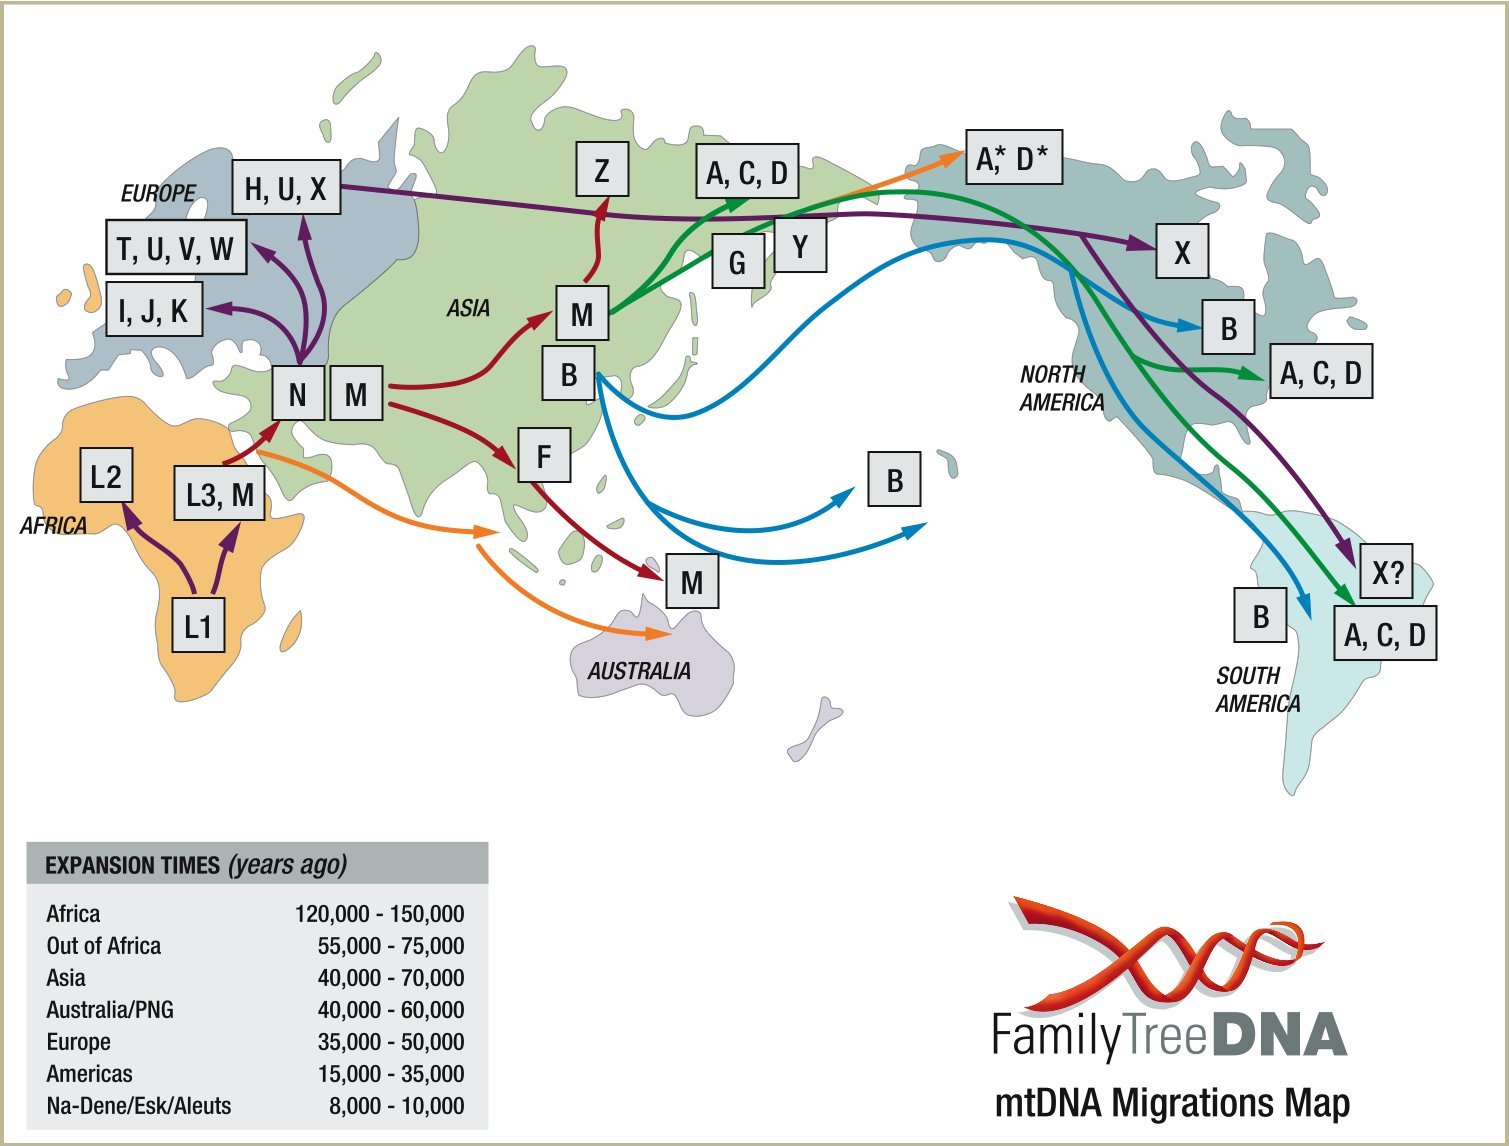 A&#x20;graphical&#x20;representation&#x20;of&#x20;mtDNA&#x20;migration&#x20;patterns&#x20;from&#x20;MITOMAP